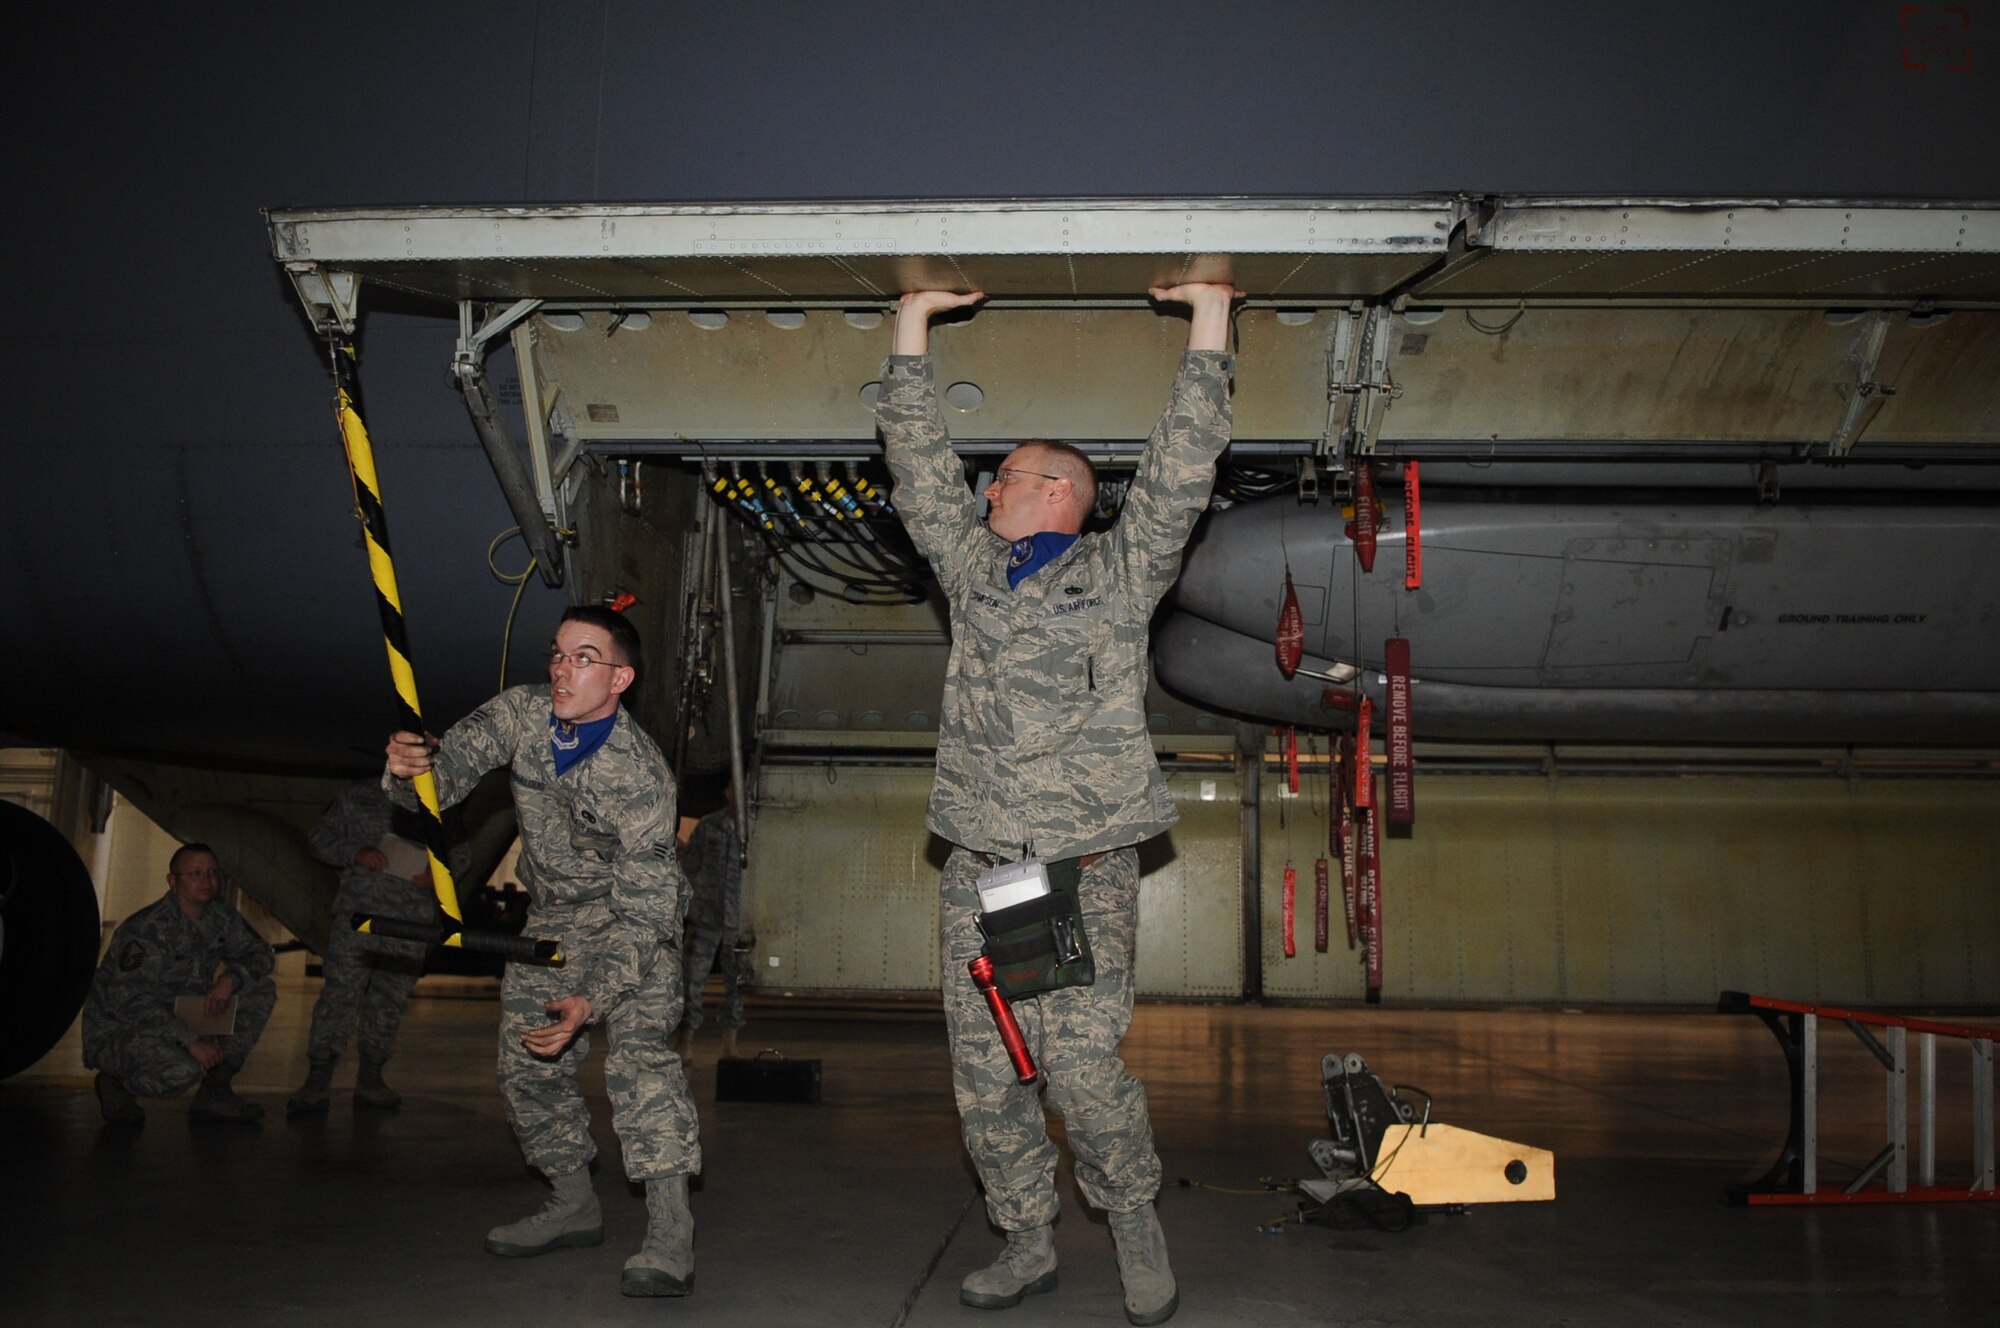 MINOT AIR FORCE BASE, N.D. -- Tech. Sgt. Brenton Sampson and Senior Airmen John Bumbalough, both 5th Aircraft Maintenance Squadron load crew members, participate in a load crew completion April 13 here. The 5th Bomb Wing joined six other bomb wings in Air Force Global Strike Command’s first-ever load competition April 13 and 14 here. The evaluation was based not only on the Warbird’s hands-on skills, but also their knowledge in their respective career fields. (U.S. Air Force photo by Staff Sgt. Stacy Moless)